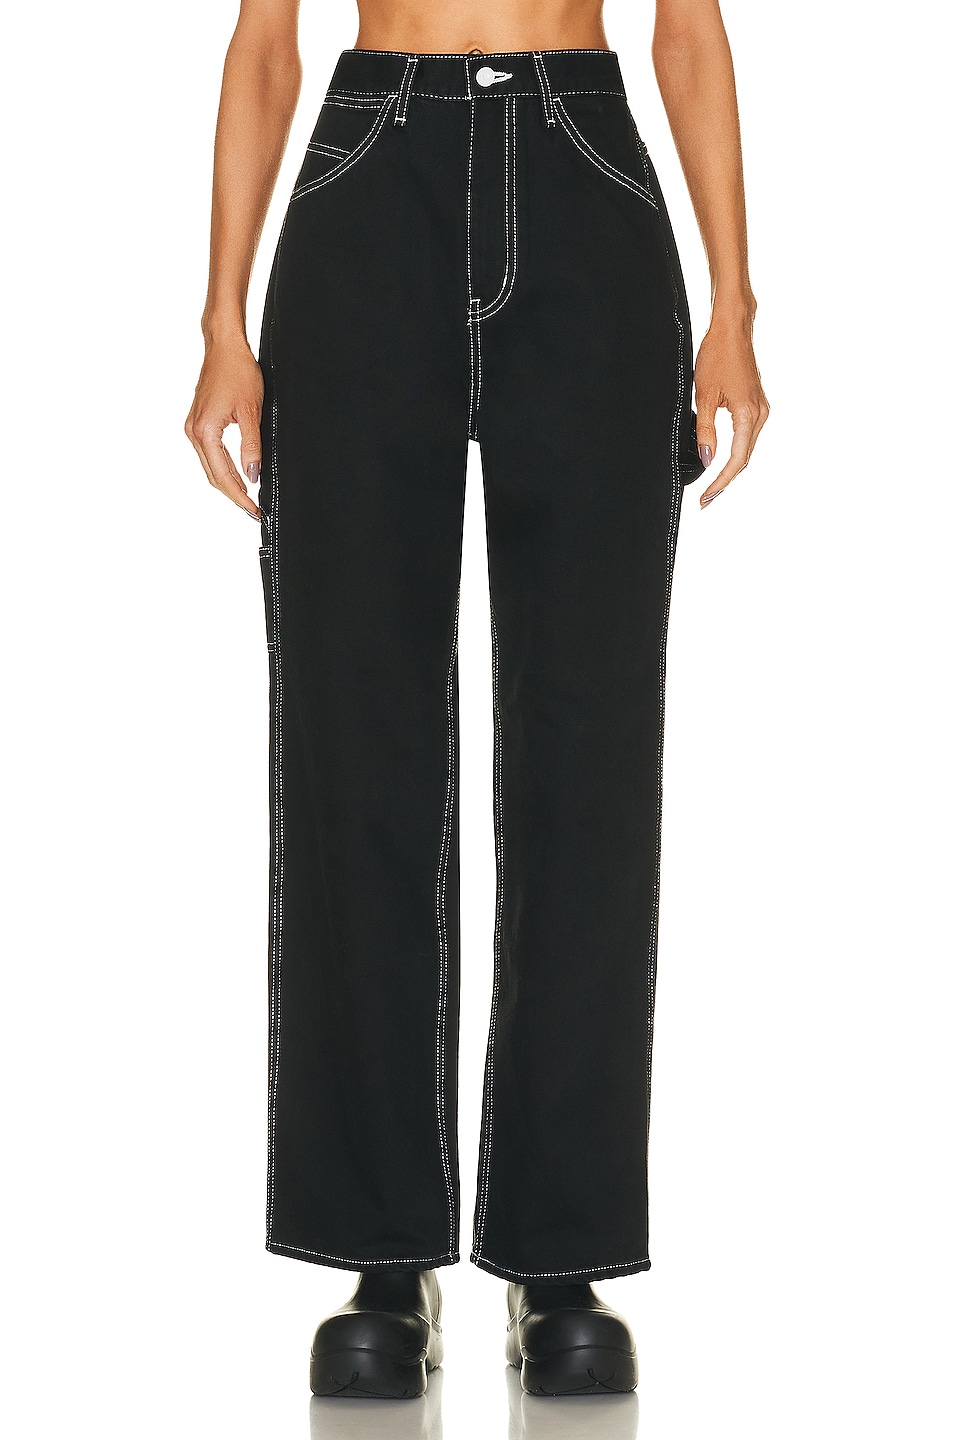 Tecolote Painter Pant in Black